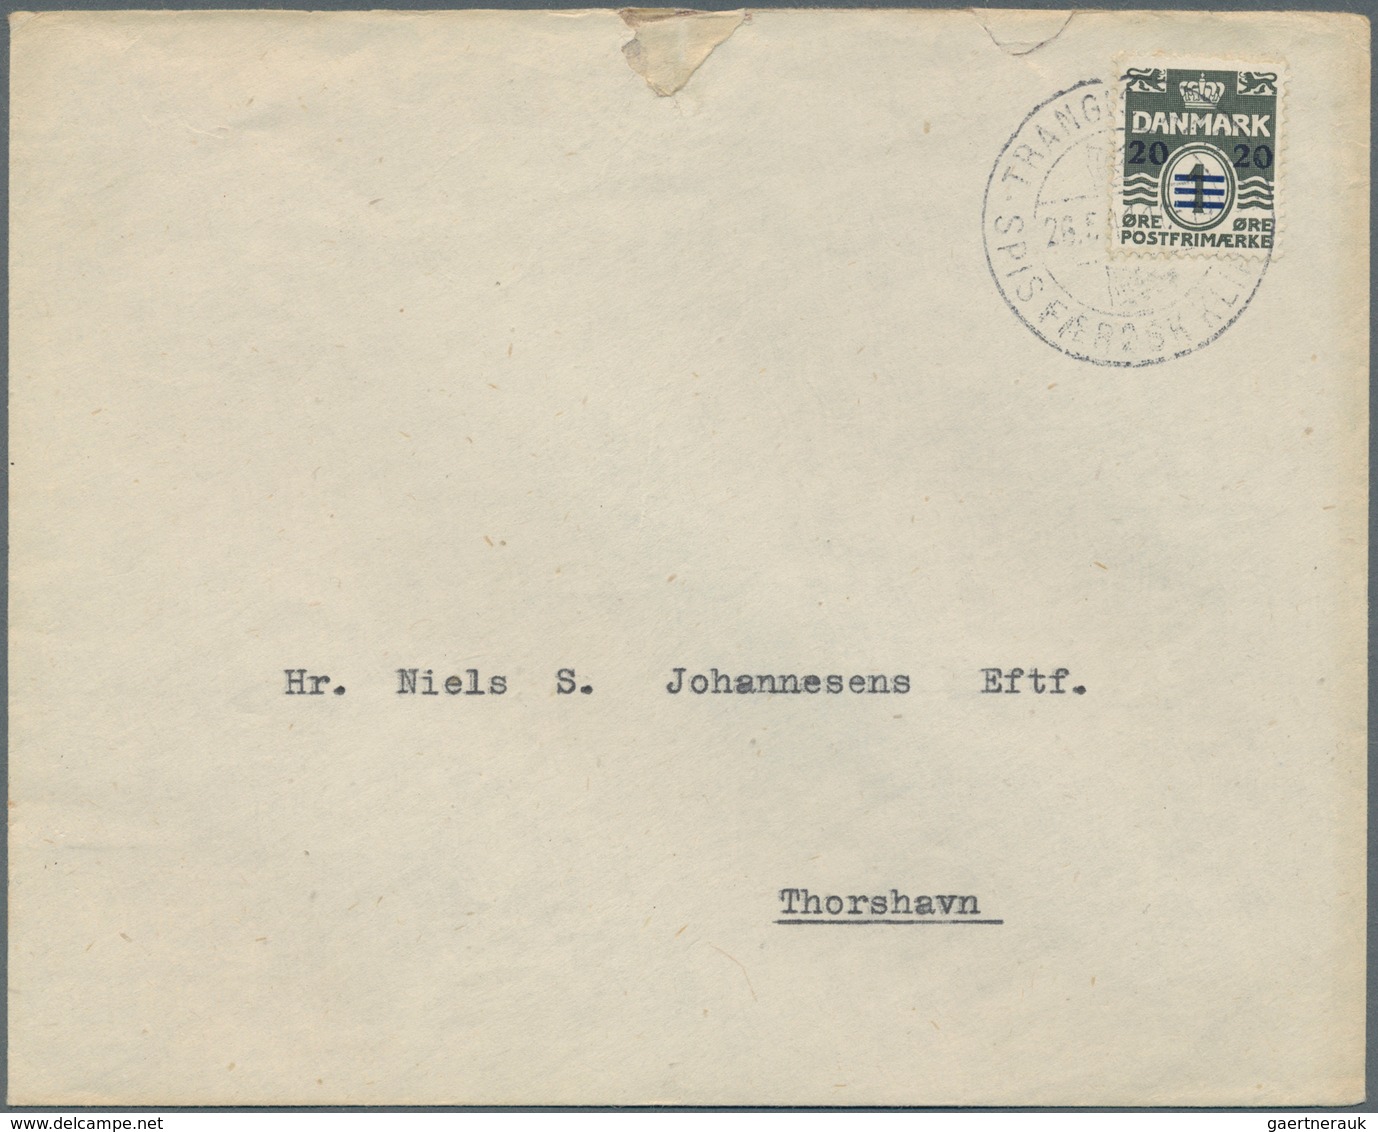 Dänemark - Färöer: 1941, 20 On 1 Öre Numeral On Domestic Letter To Thorshavn. Cover Showing Some Ope - Faroe Islands